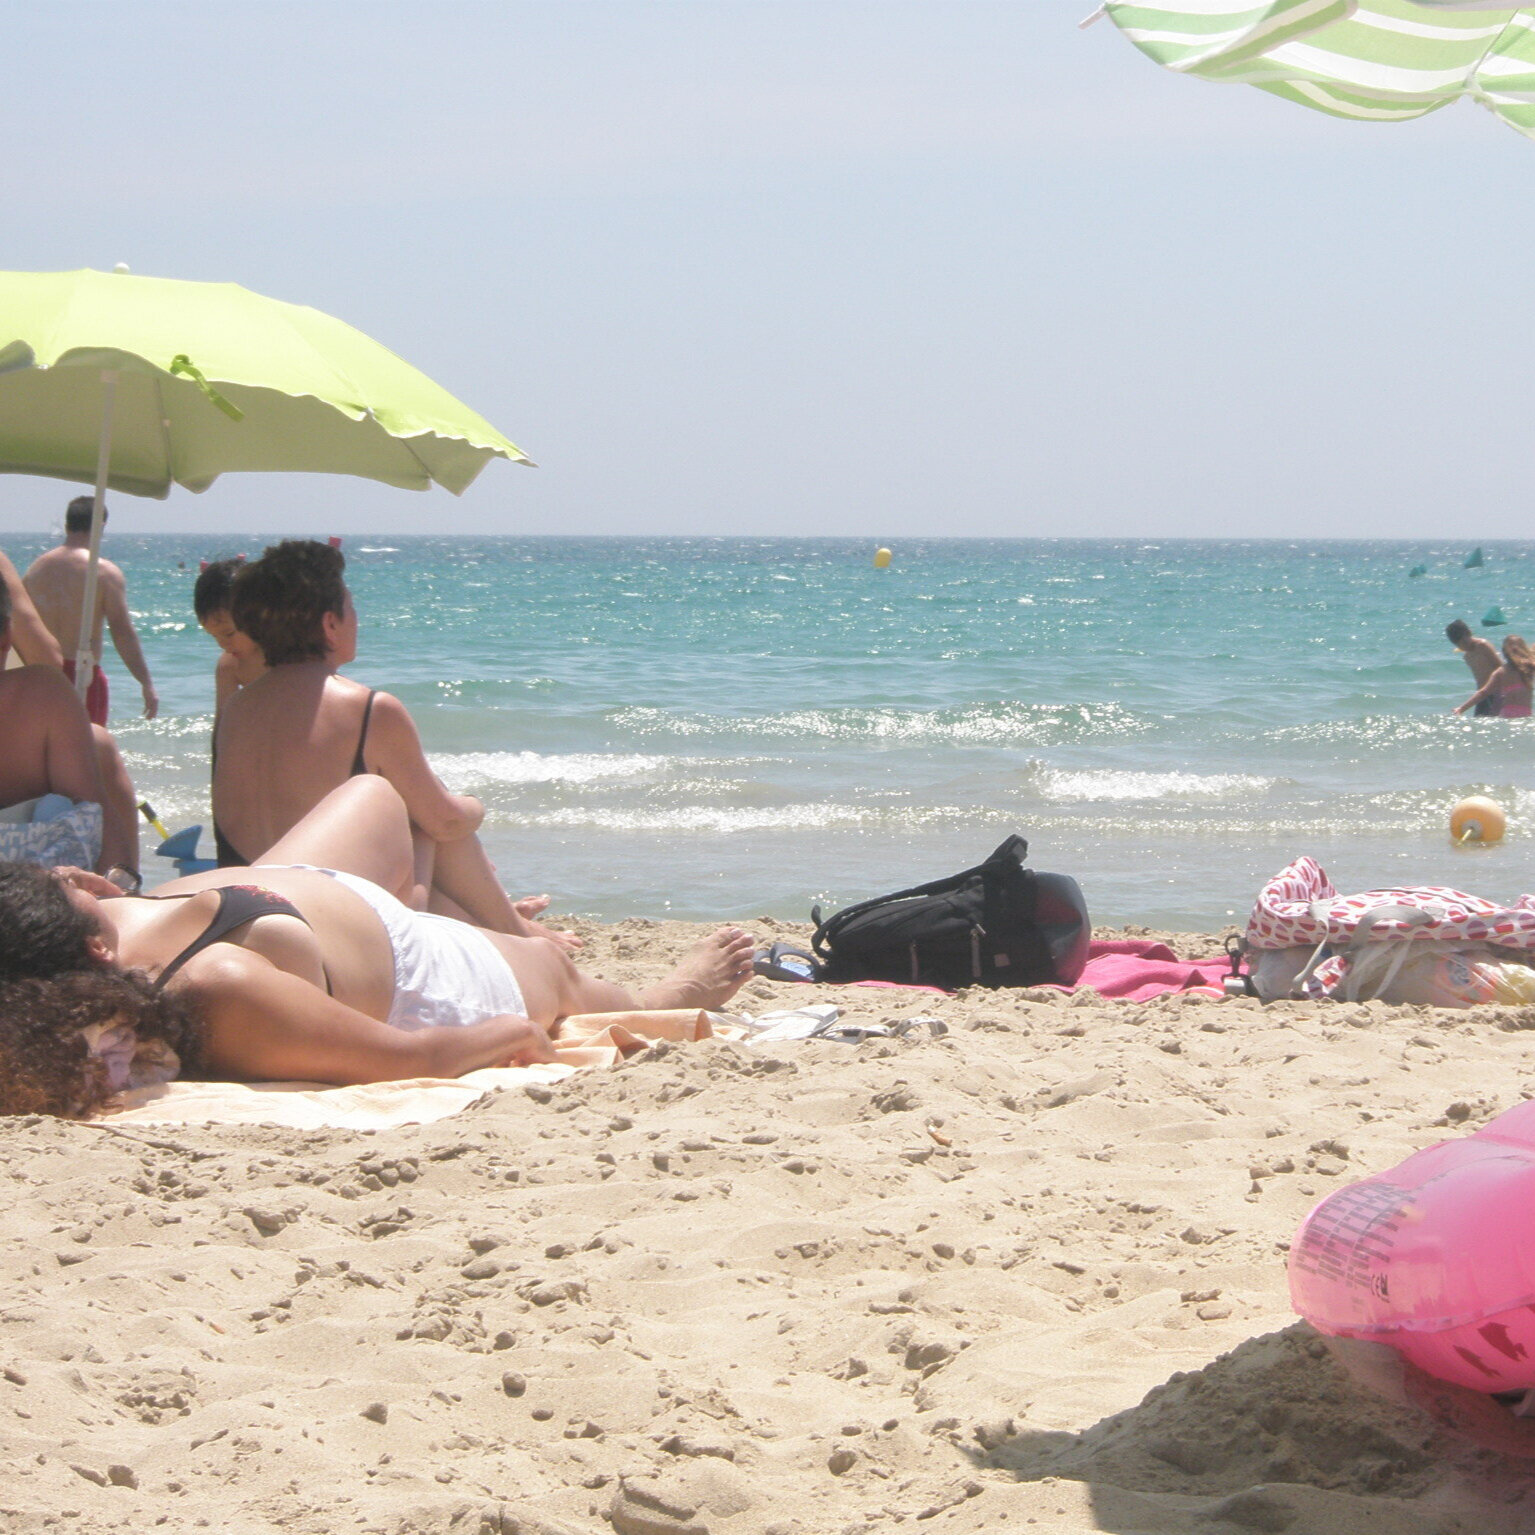 Beach-goers must maintain safe social distancing this year in Spain.